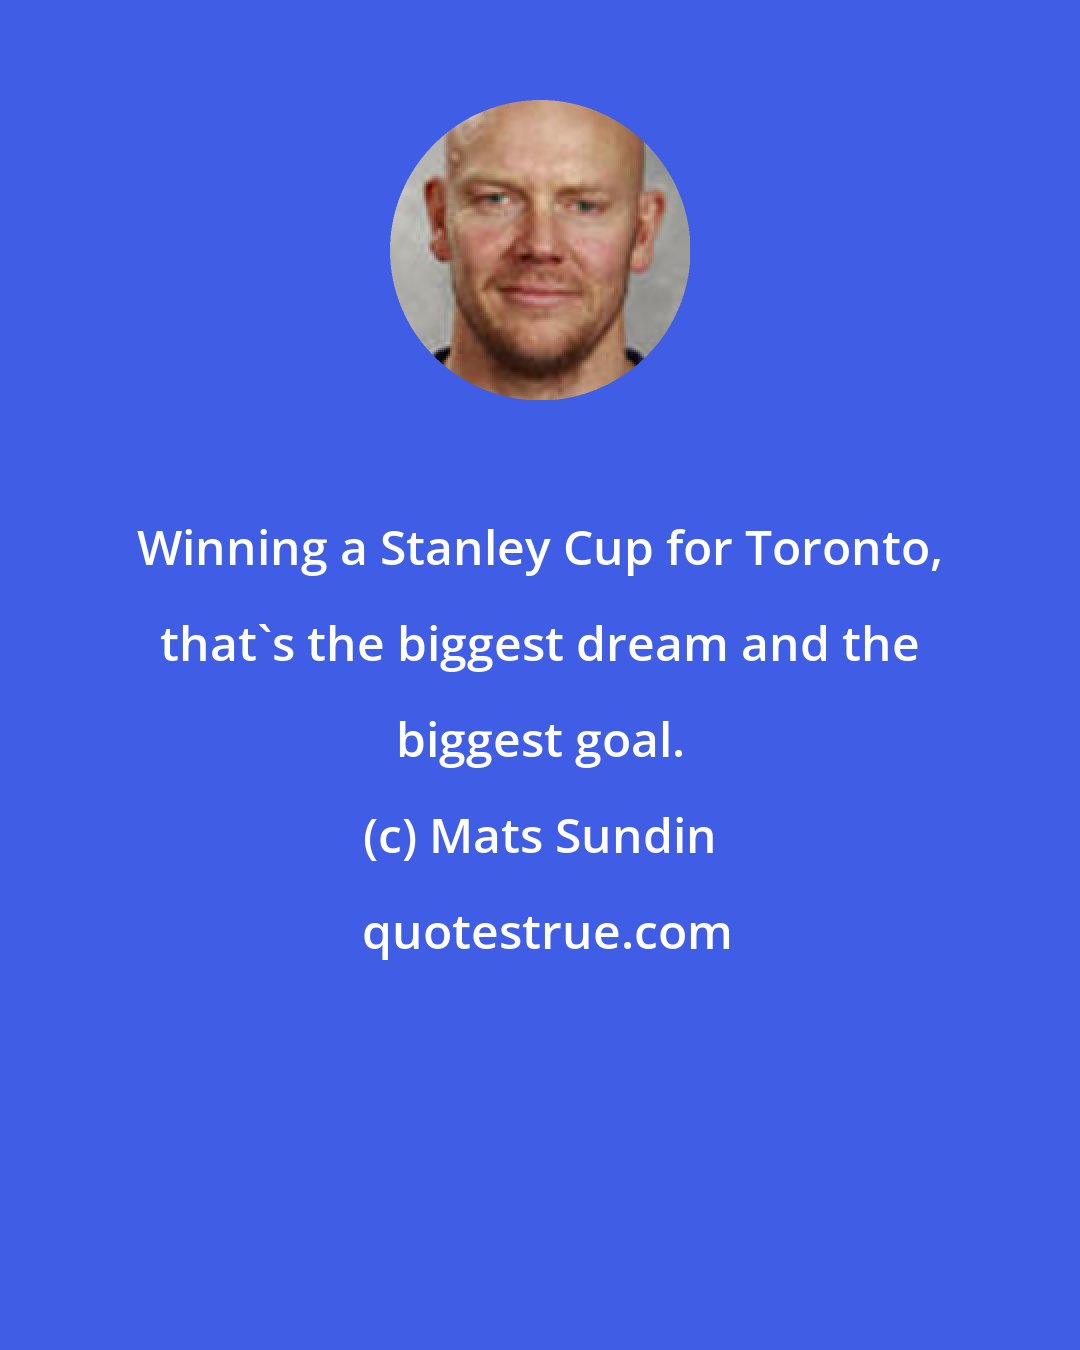 Mats Sundin: Winning a Stanley Cup for Toronto, that's the biggest dream and the biggest goal.